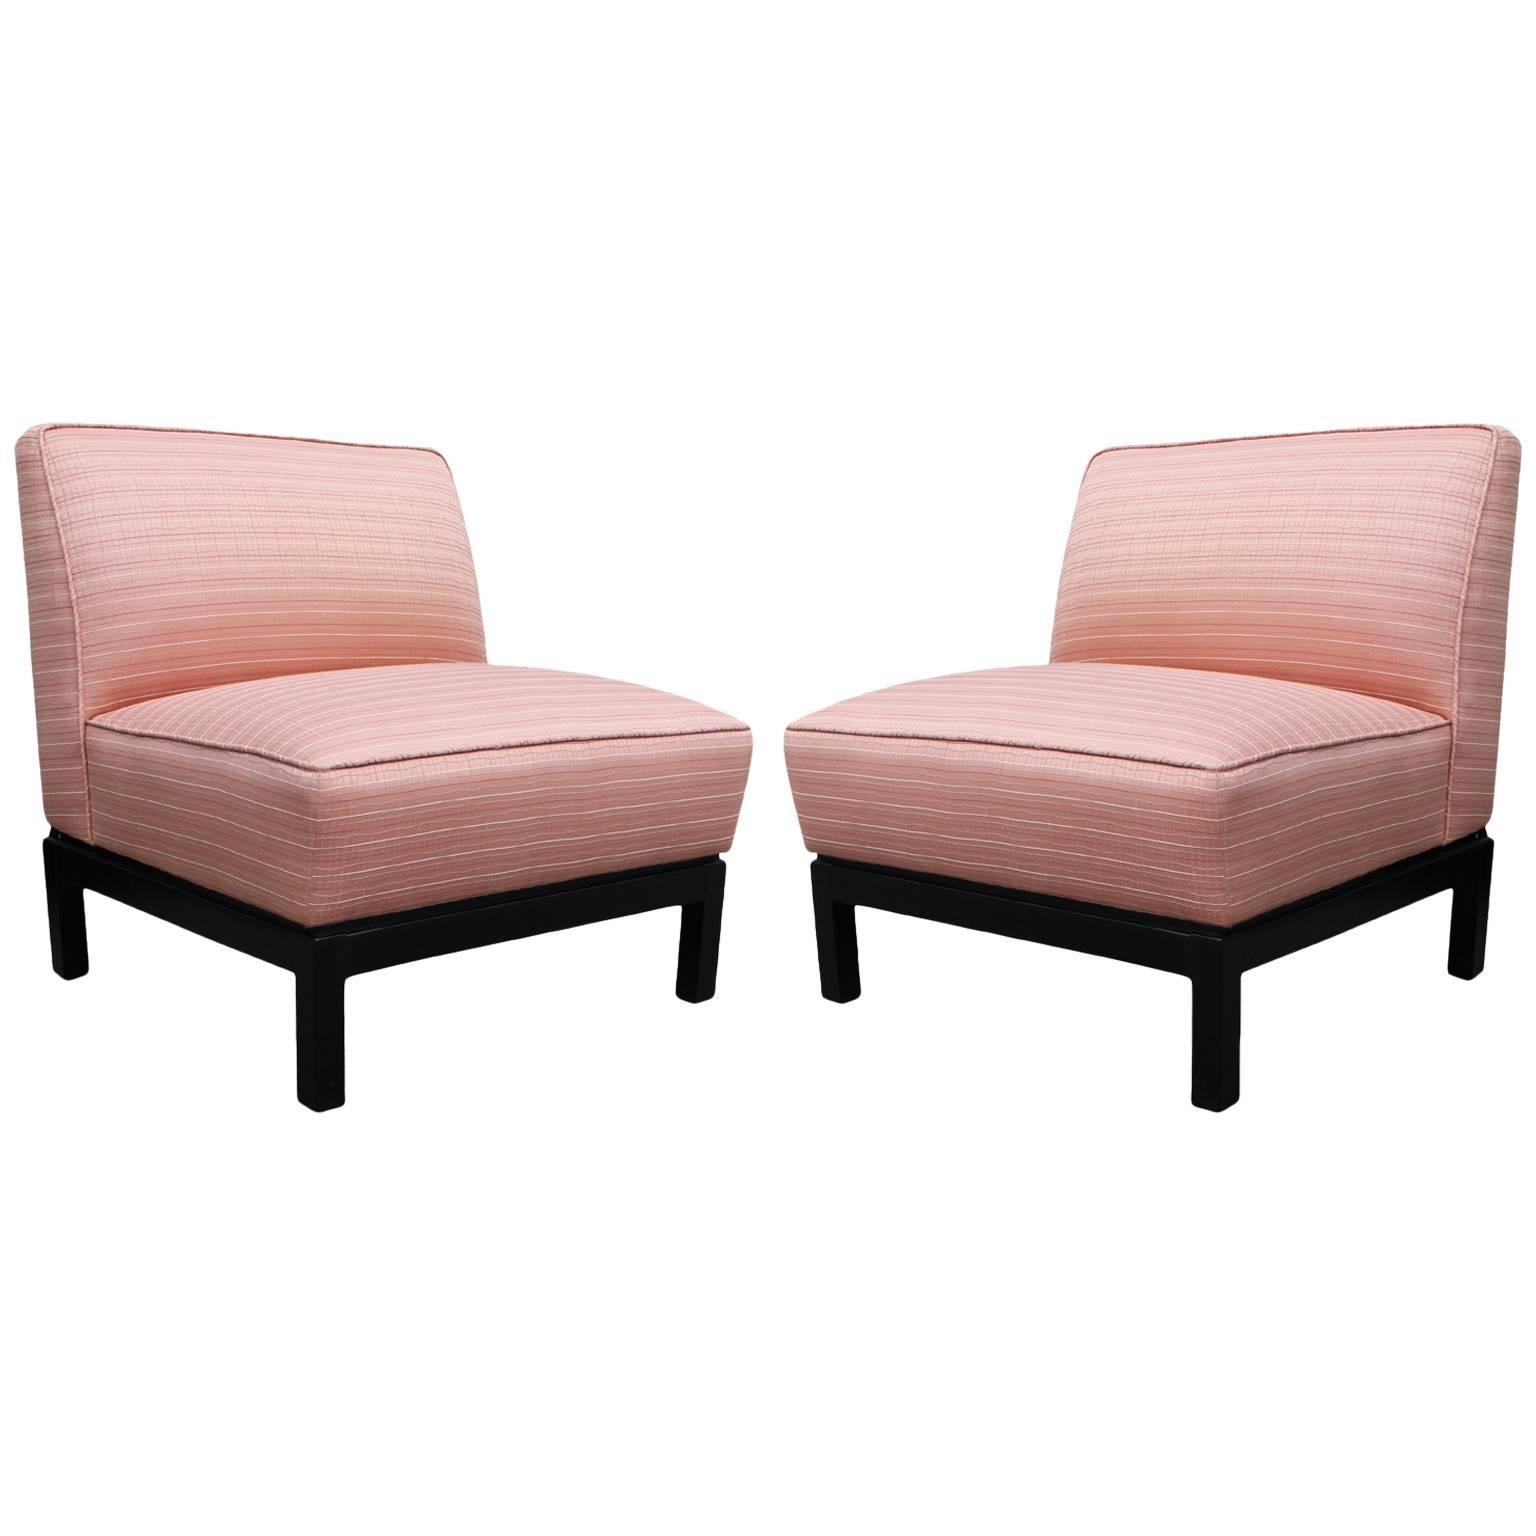 Pair of Clean Lined Modern Slipper Chairs in Light Pink with Deep Walnut Bases